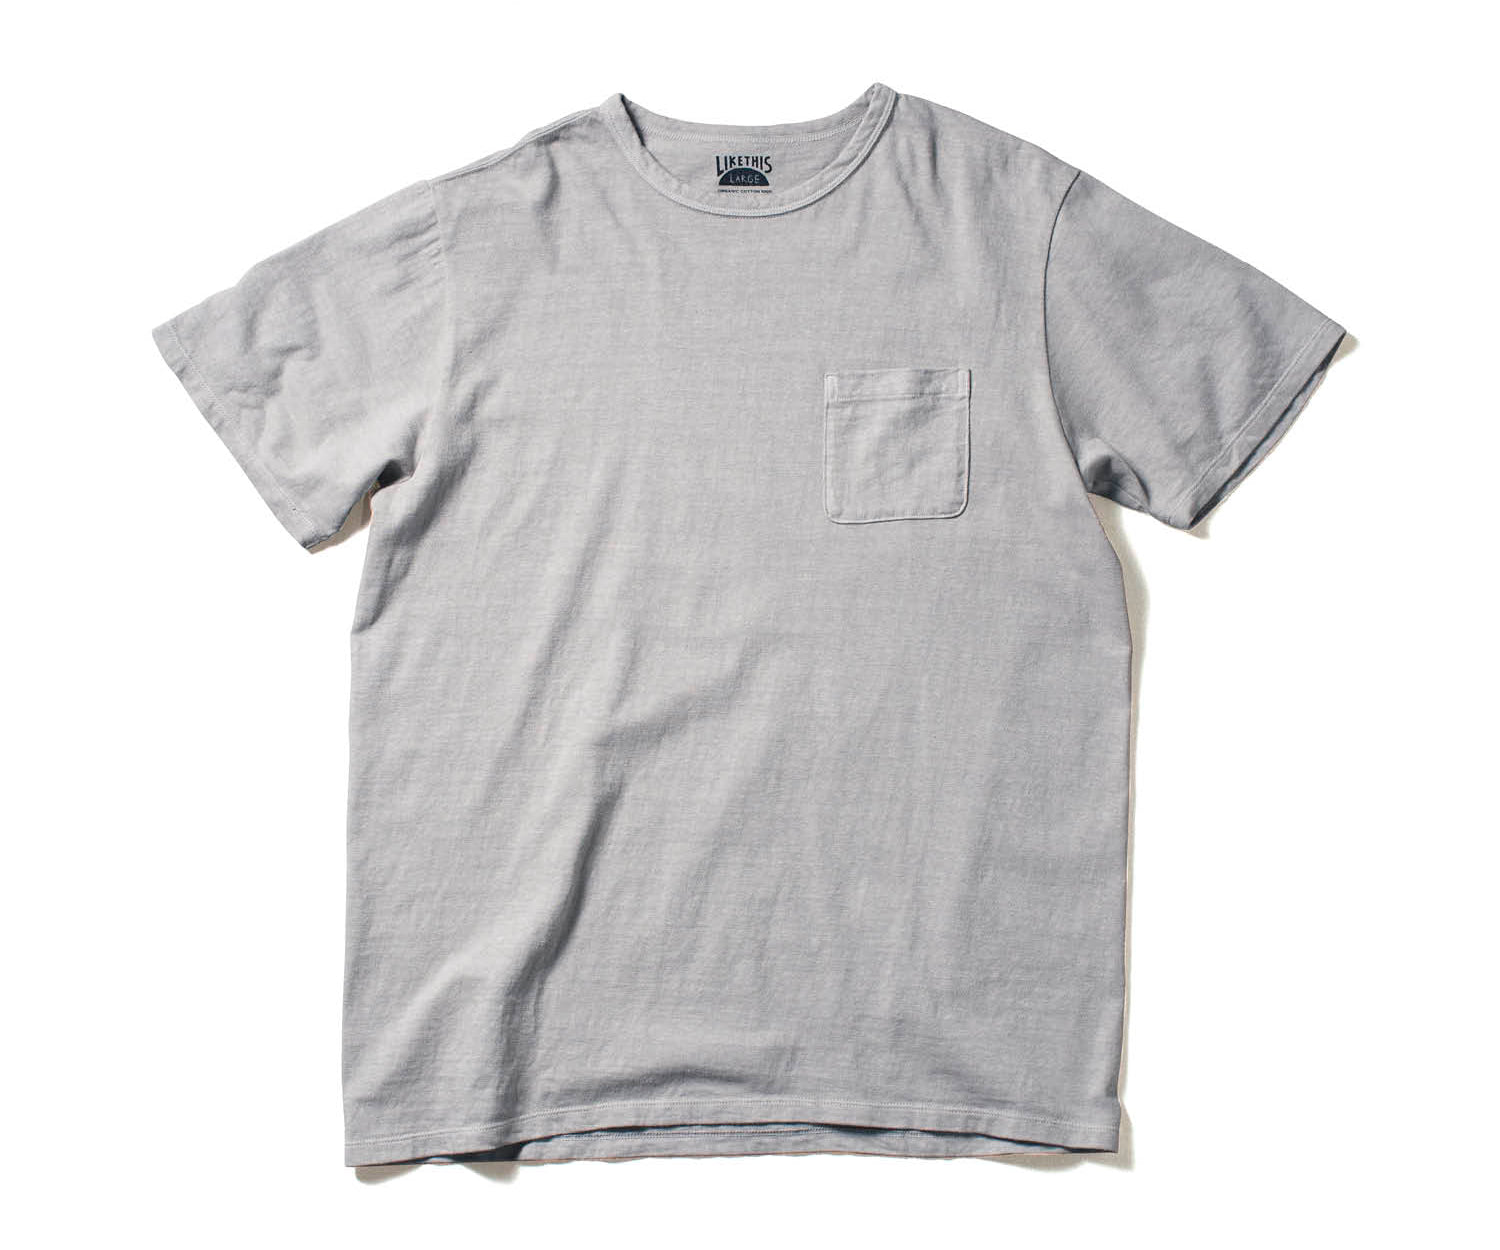 Recycle Organic Cotton Bamboo Charcoal Dye Pocket Tee | LIKE THIS SHOP